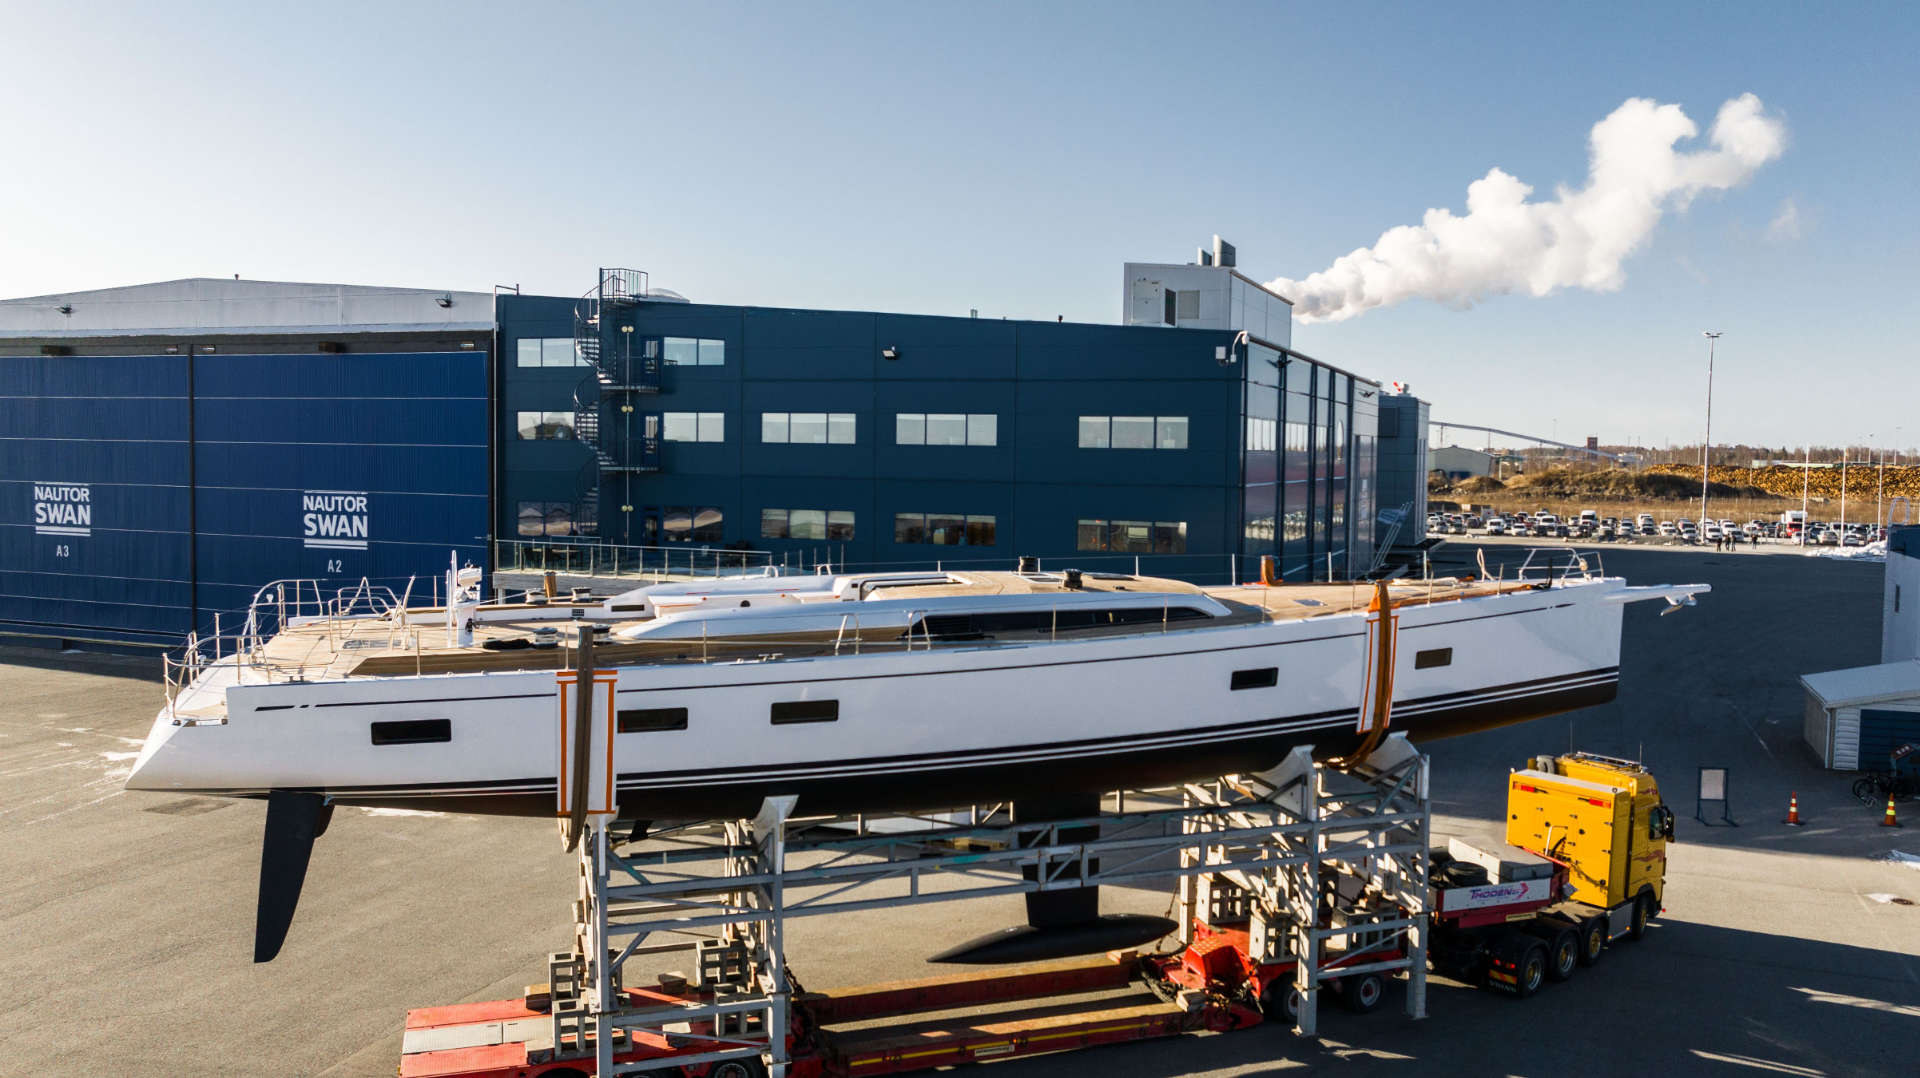 SWAN 88 – THE FIRST HYBRID ELECTRIC PROPULSION YACHT BY SWAN HAS BEEN LAUNCHED